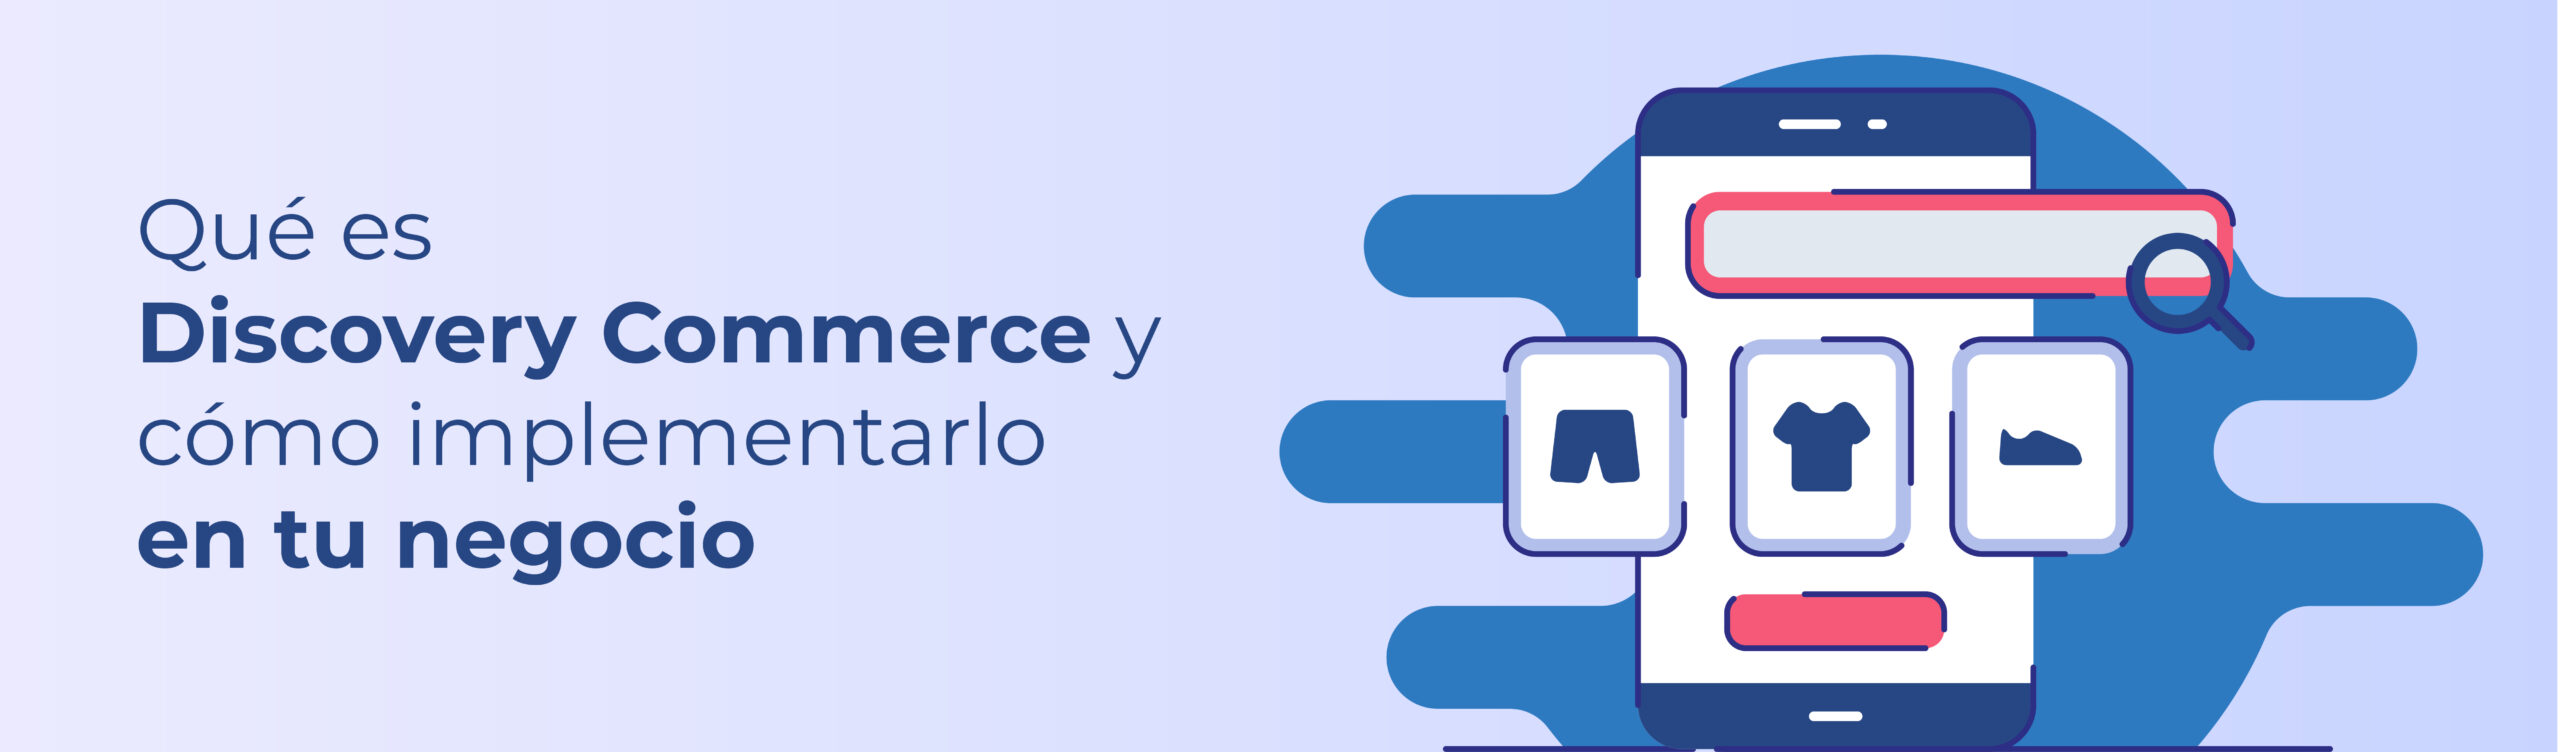 Que es Discovery Commerce